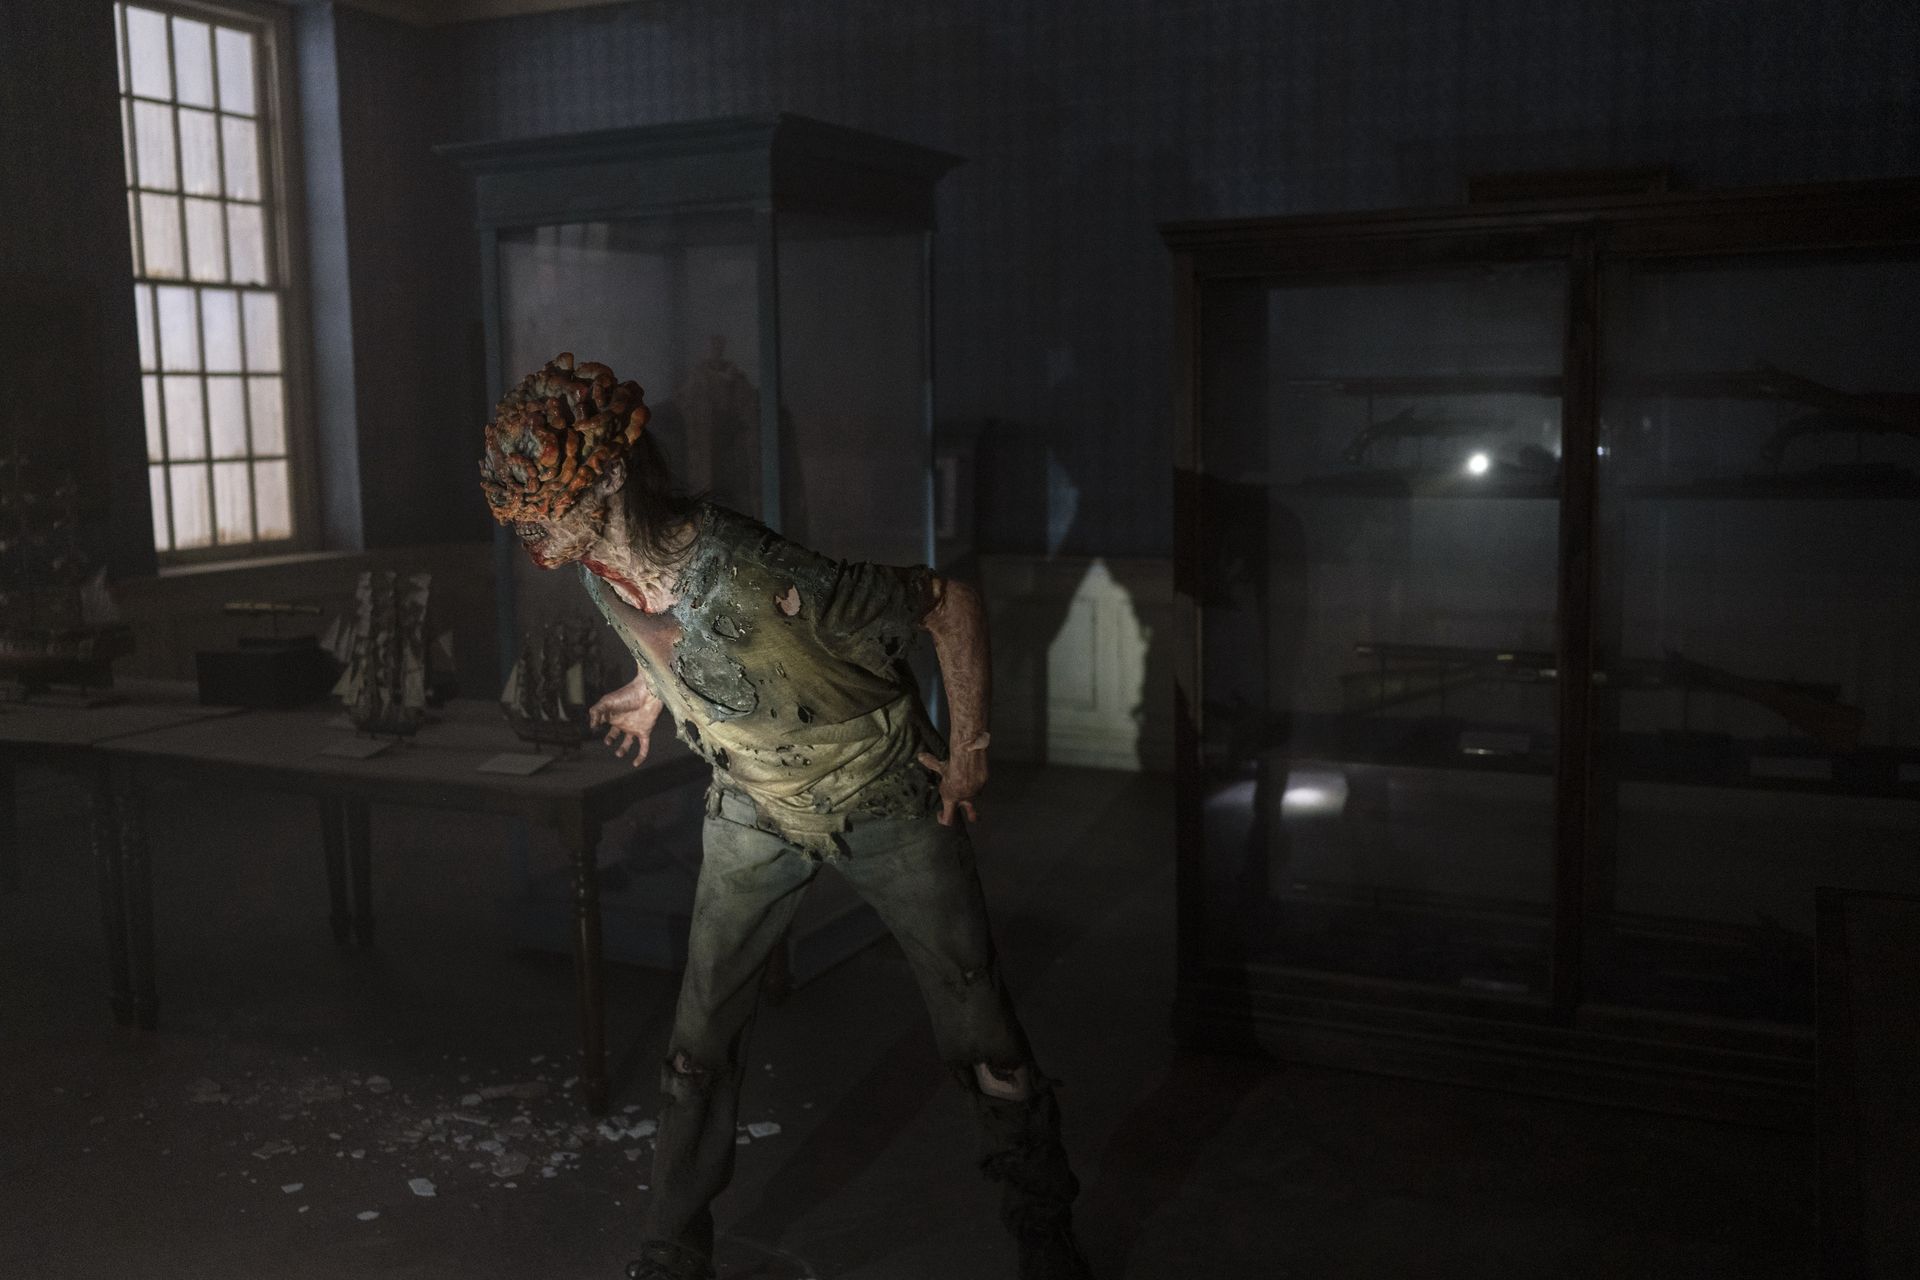 Who Dies in The Last of Us? All Deaths in The Last of Us, Explained